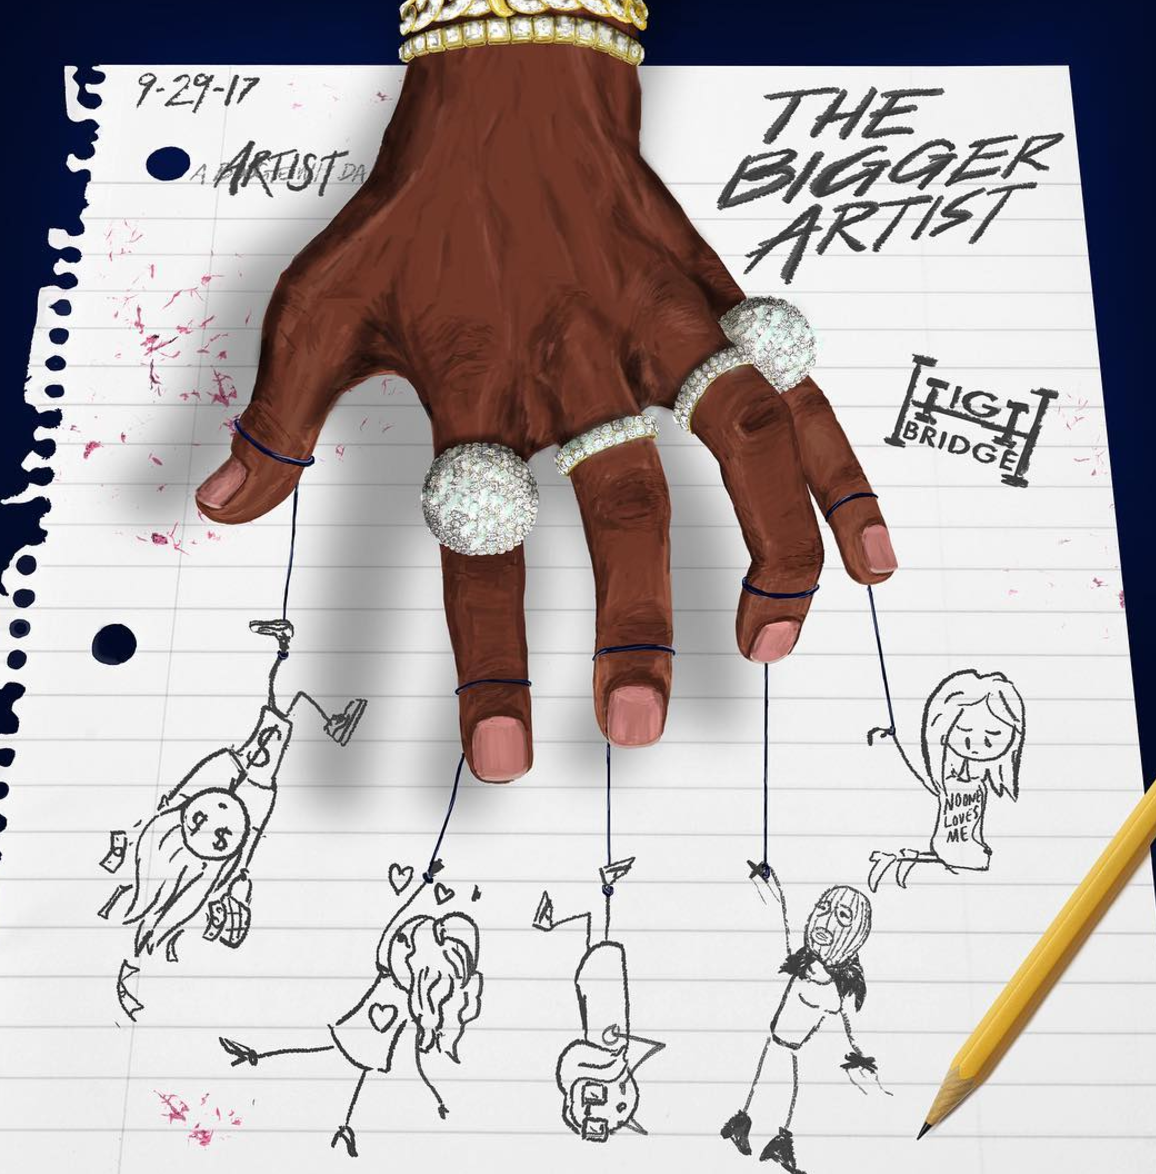 A Boogie Wit Da Hoodie Shares Artwork & Release Date For Debut Album [PEEP]